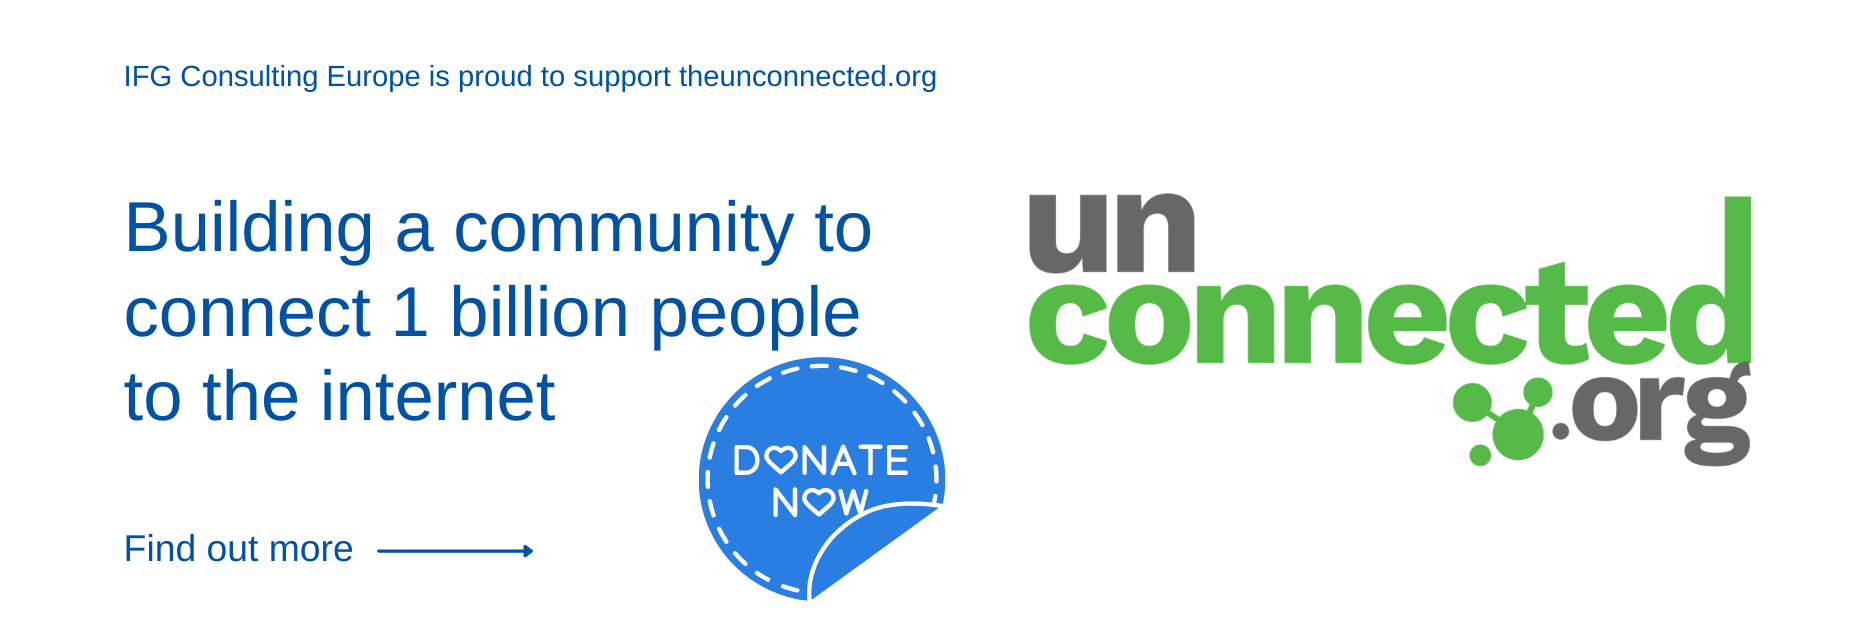 theunconnected.org Christmas banner